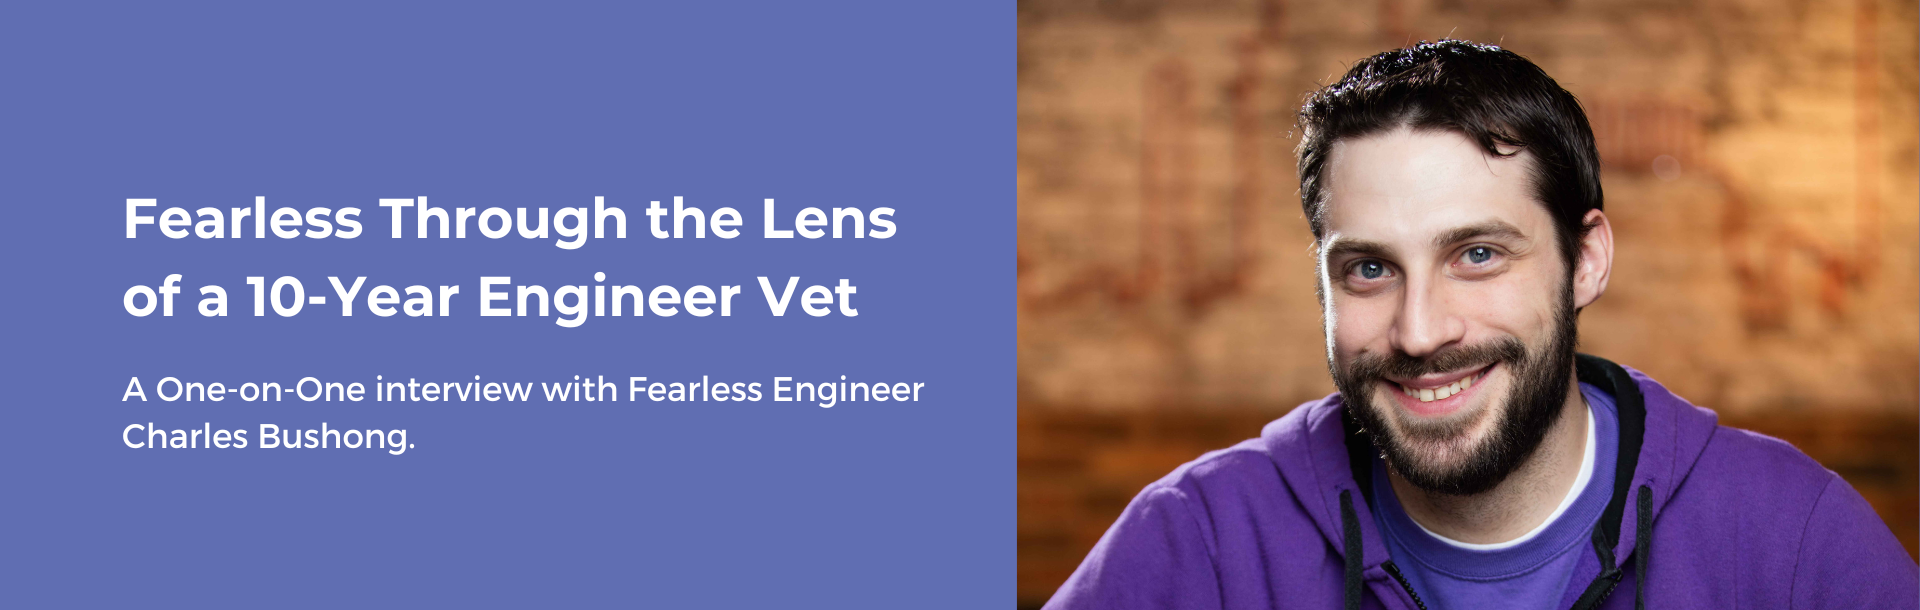 Fearless Through the Lens of a 10-Year Engineering Herd Vet